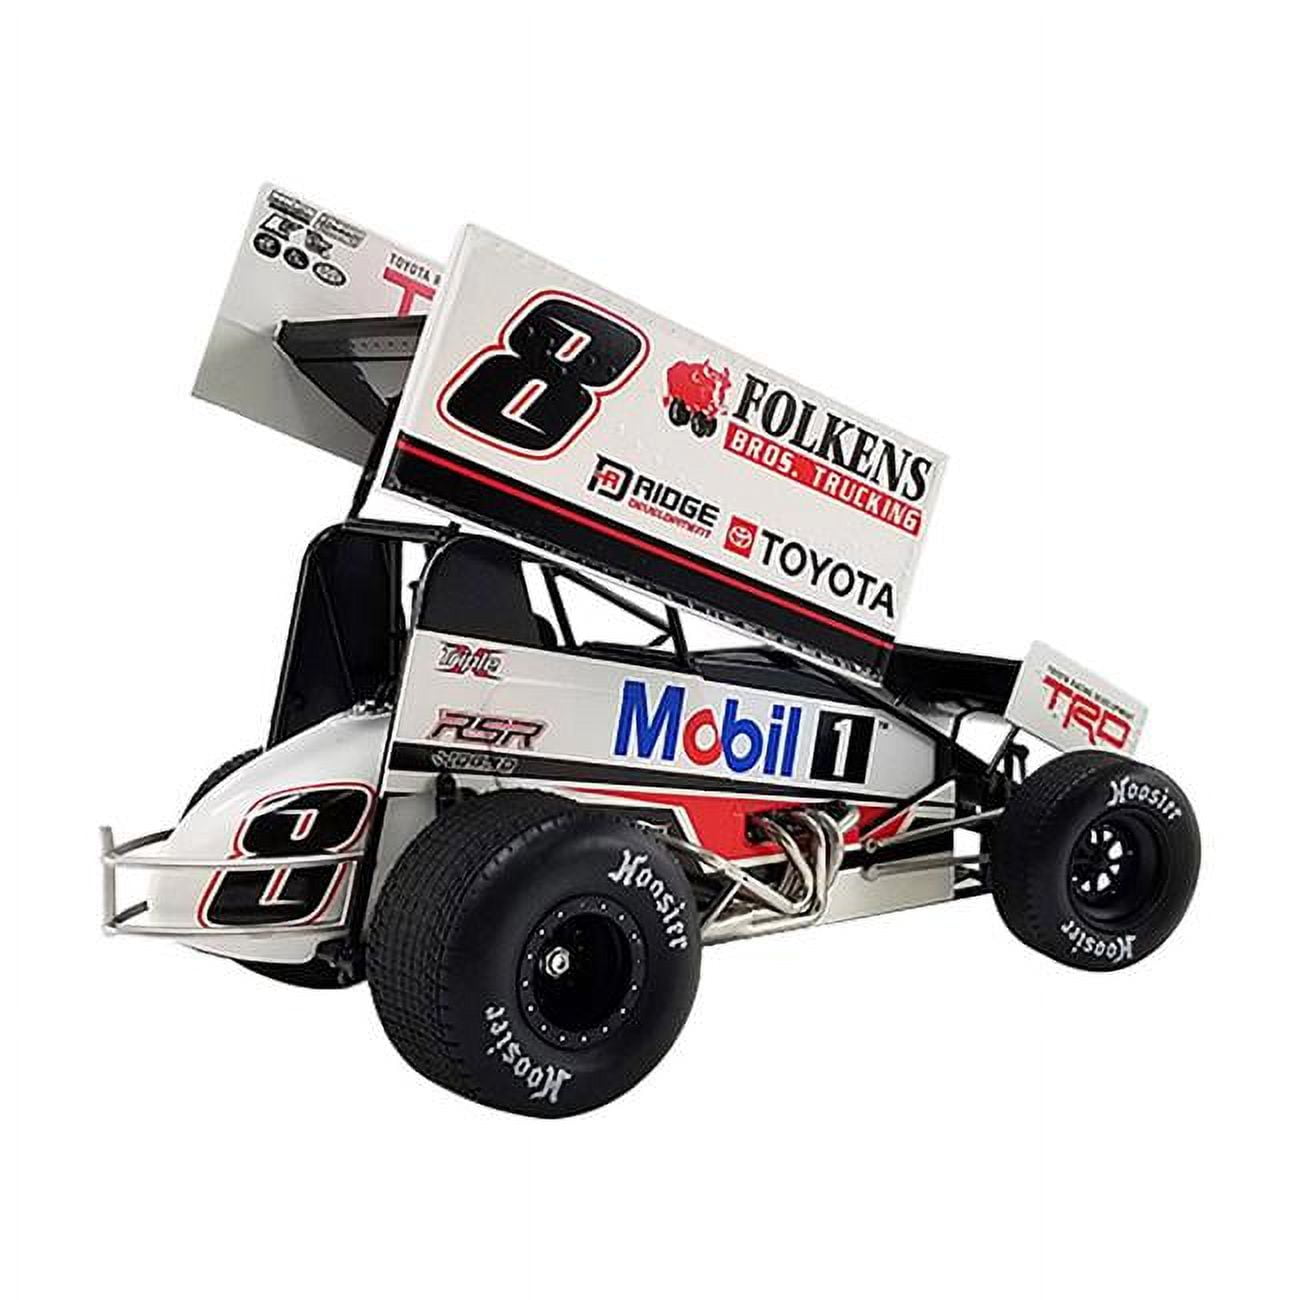 Picture of ACME A1822015 Winged Sprint Car No.8 Aaron Reutzel Mobil 1 in. Roth Motorsports World of Outlaws 2022 1 by 18 Scale Diecast Model Car